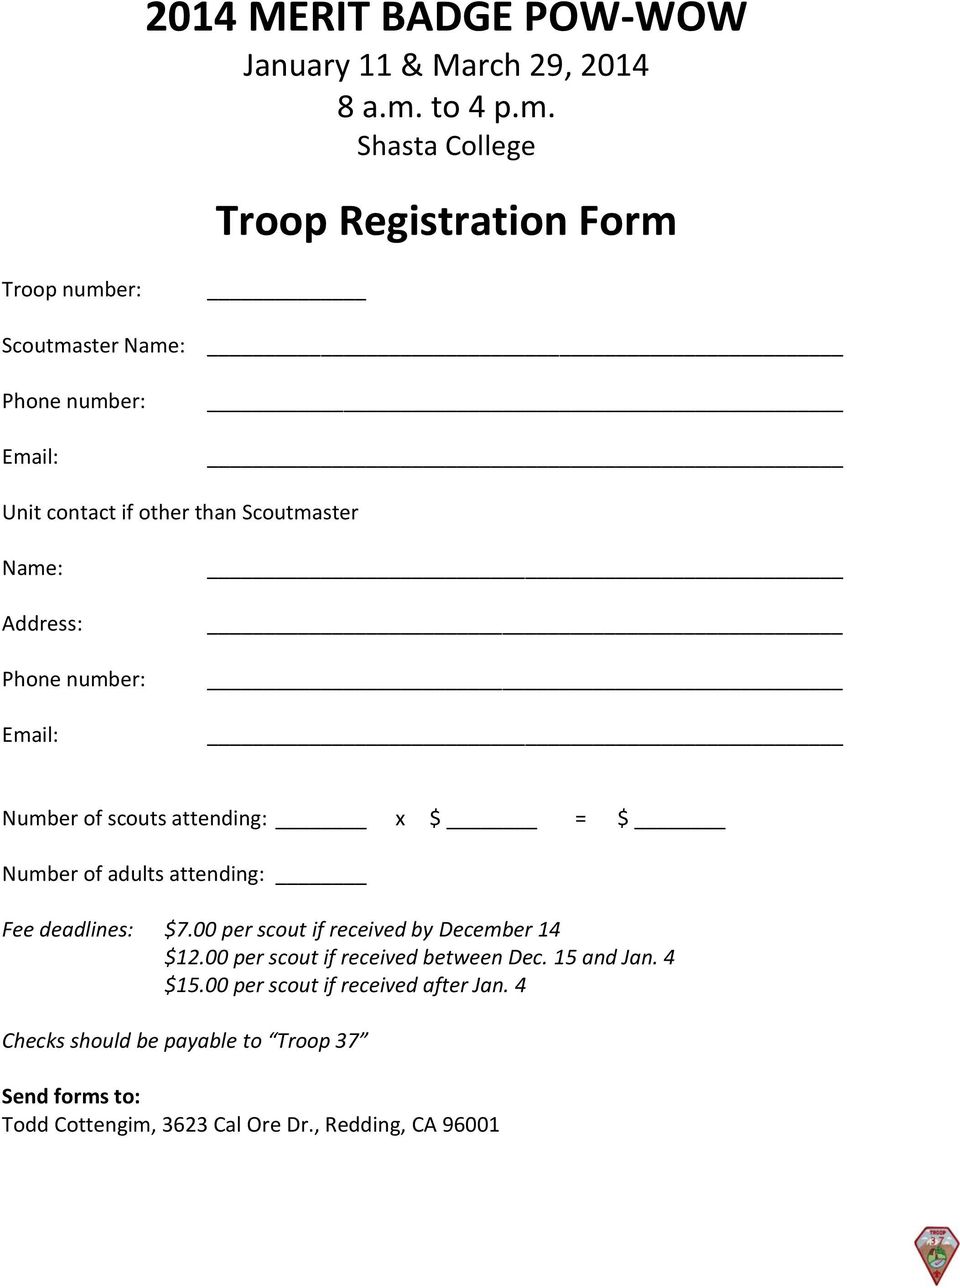 Shasta College Troop Registration Form Troop number: Scoutmaster Name: Phone number: Email: Unit contact if other than